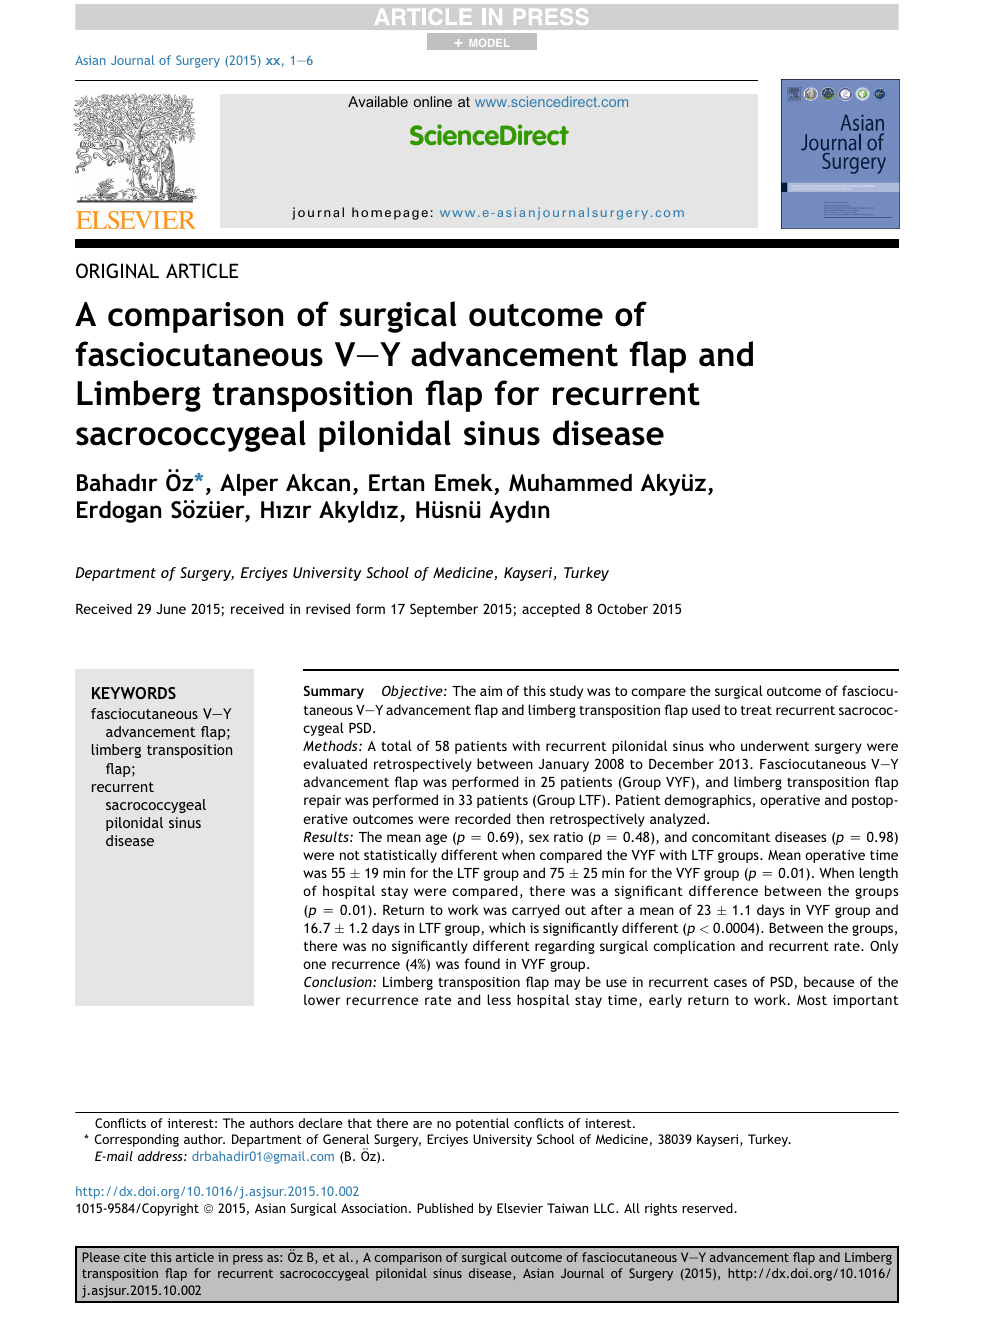 A Comparison Of Surgical Outcome Of Fasciocutaneous V Y Advancement Flap And Limberg Transposition Flap For Recurrent Sacrococcygeal Pilonidal Sinus Disease Topic Of Research Paper In Clinical Medicine Download Scholarly Article Pdf